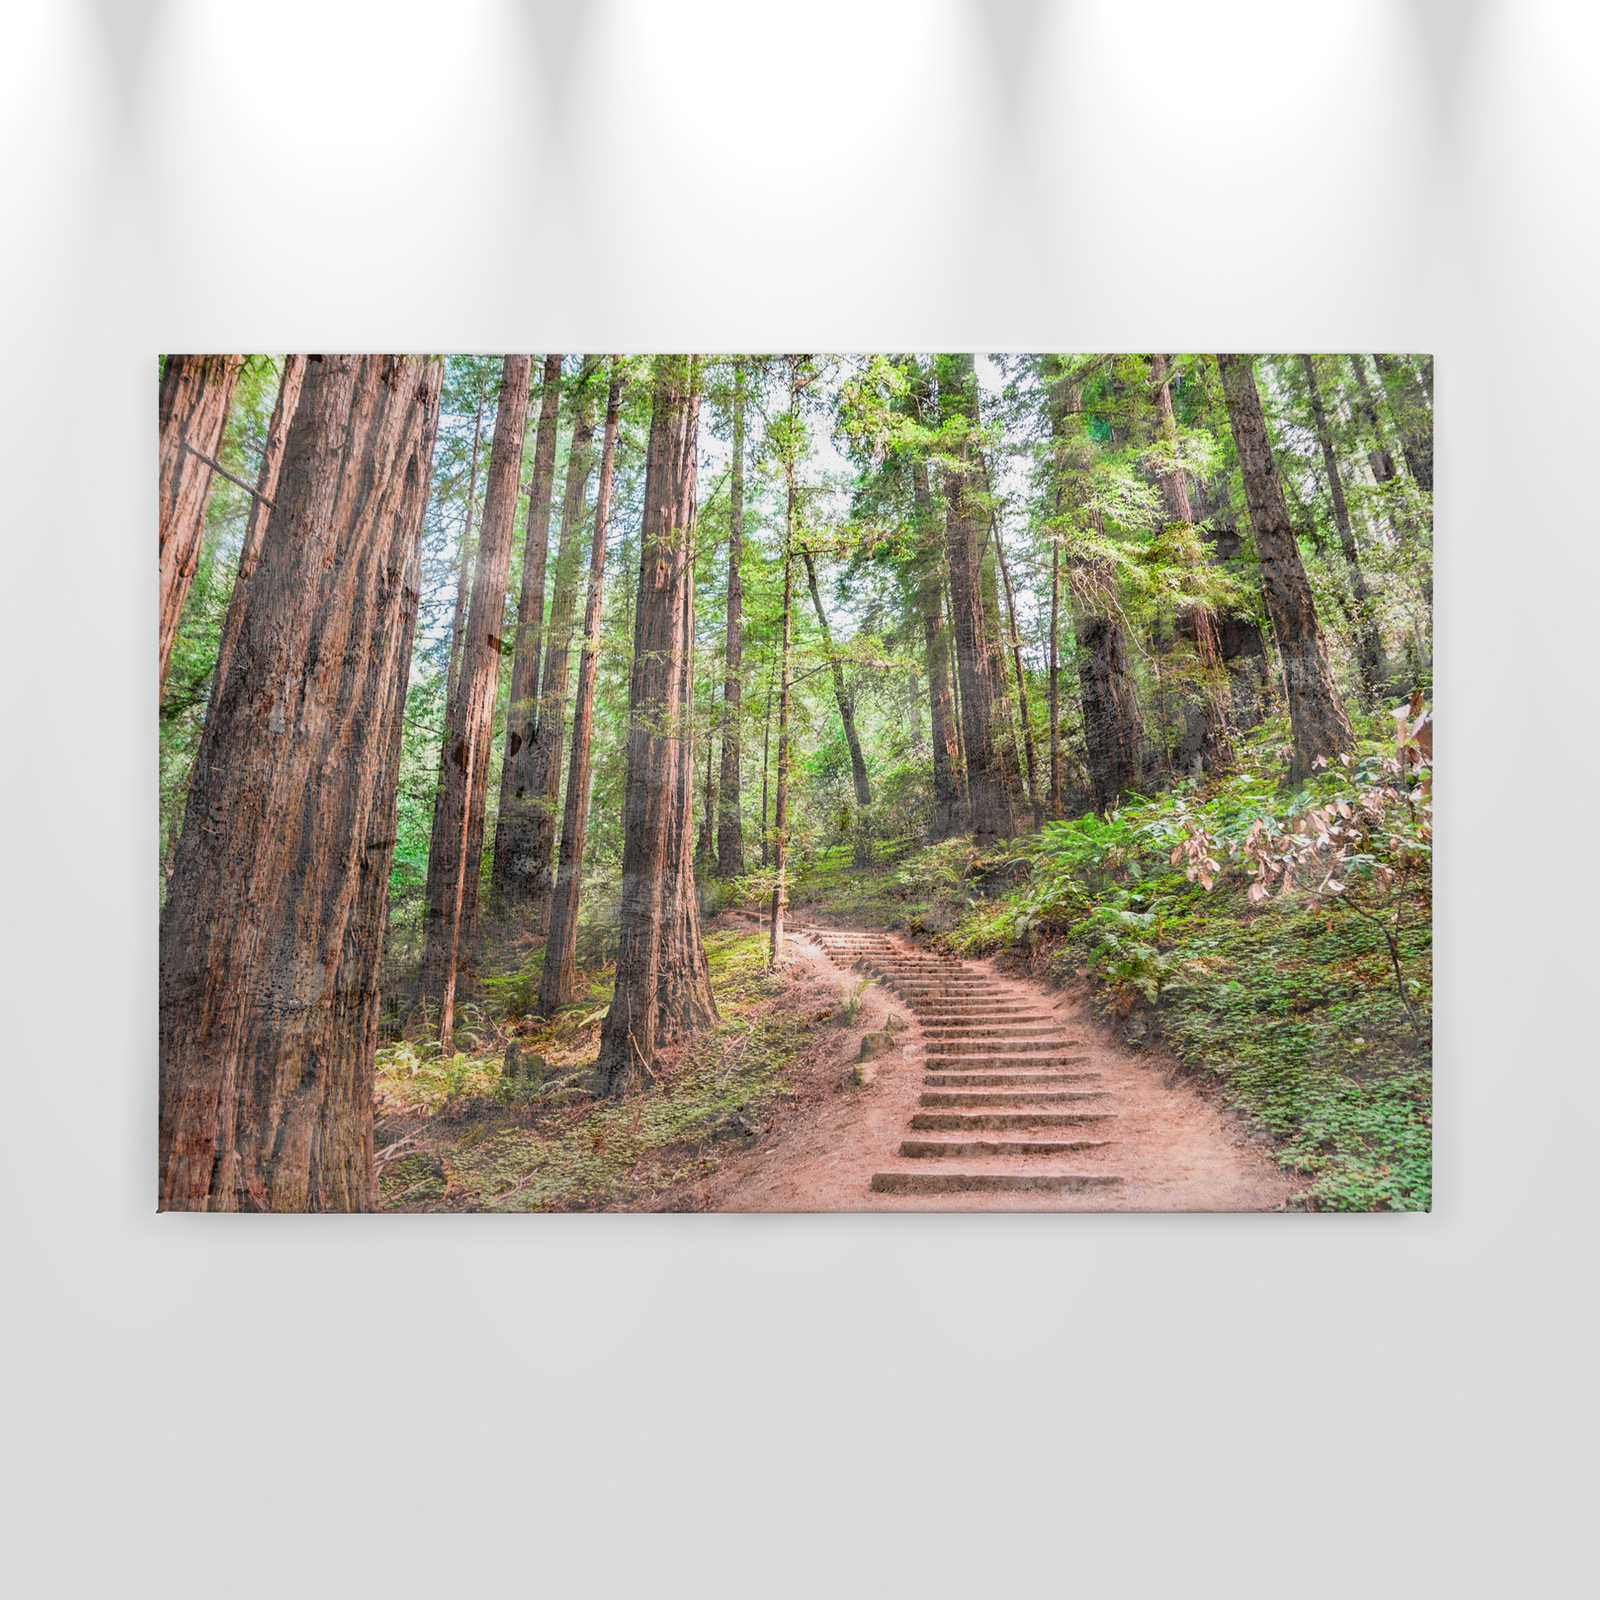             Canvas with wooden stairs through the forest | brown, green, blue - 0.90 m x 0.60 m
        